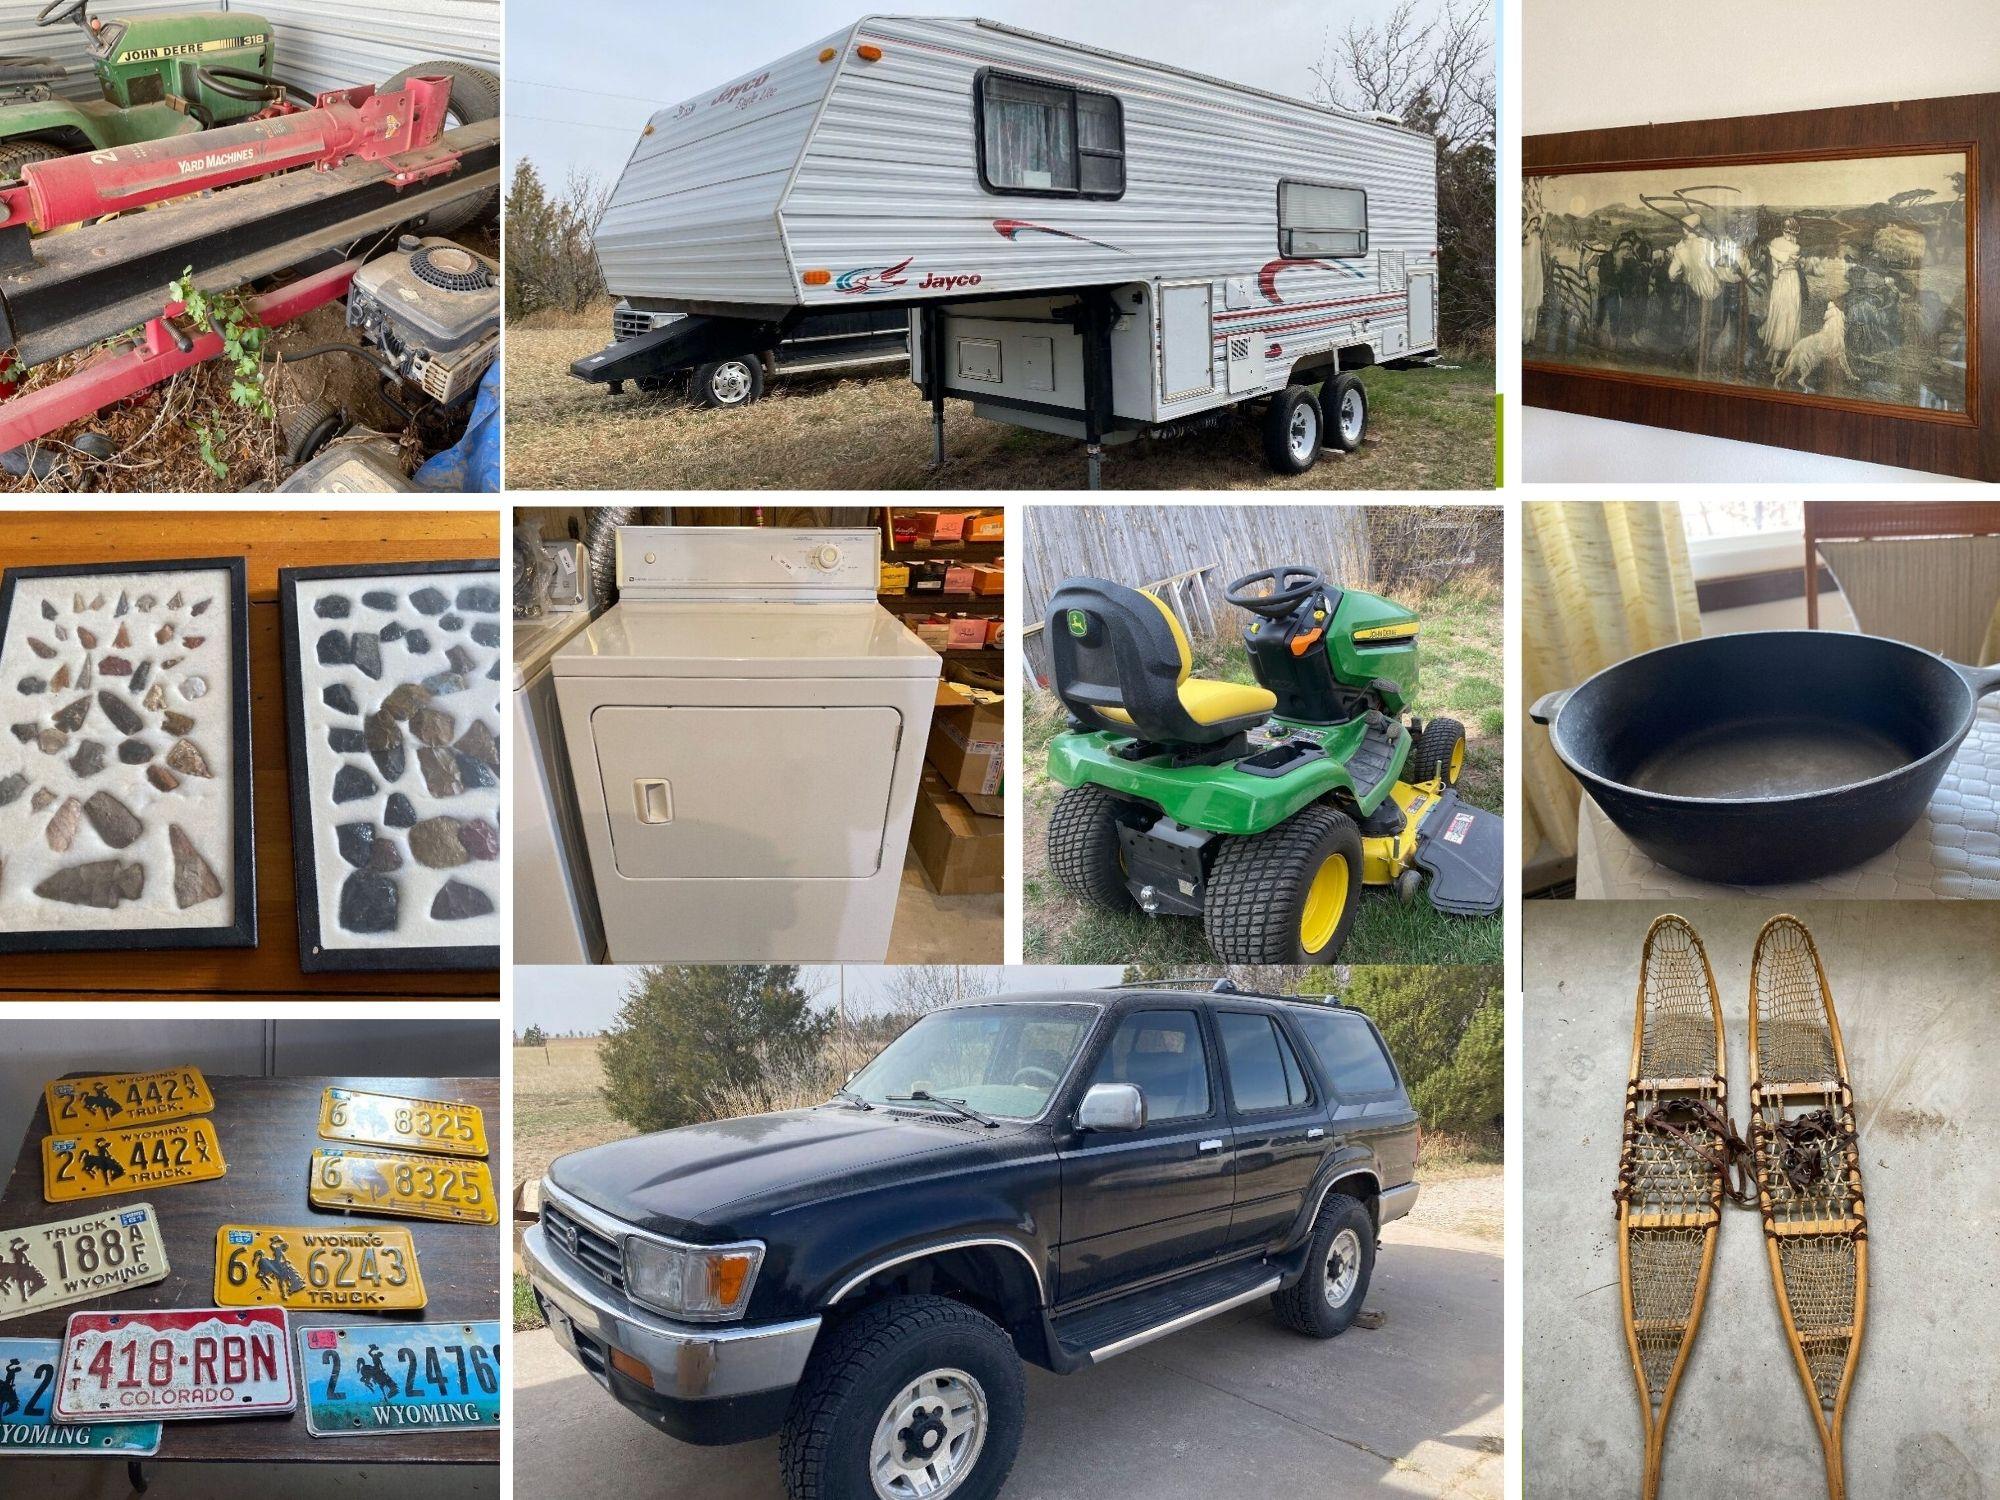 From Campers to Cast Iron, Crocks and Collectibles